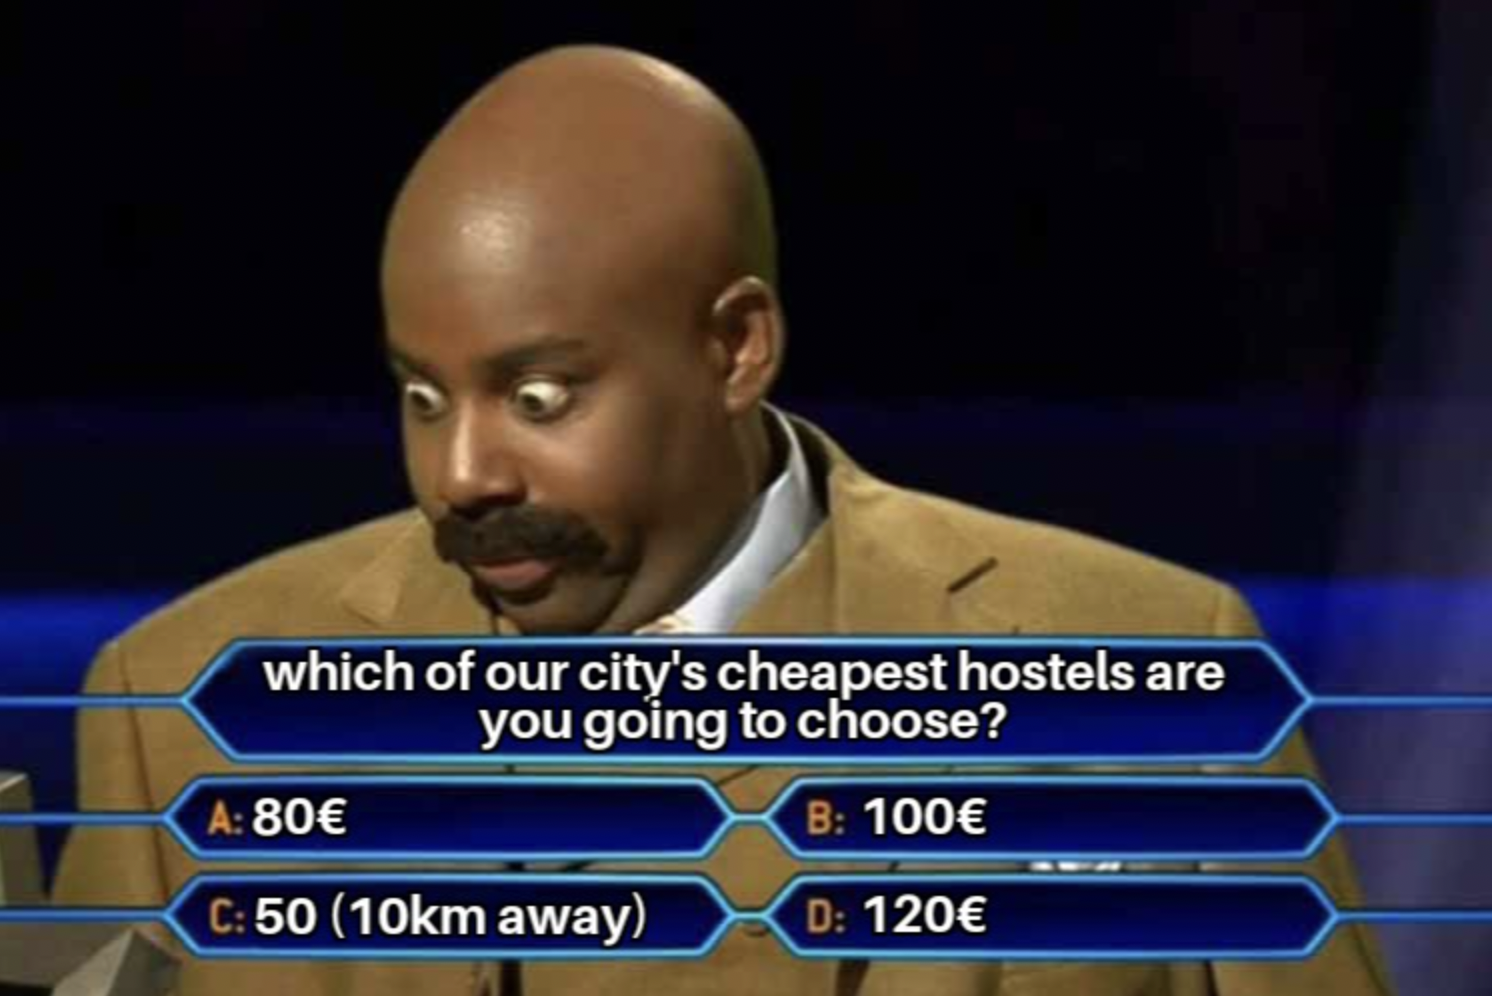 broke my back - which of our city's cheapest hostels are you going to choose? B 100 D 120 A 80 C 50 10km away